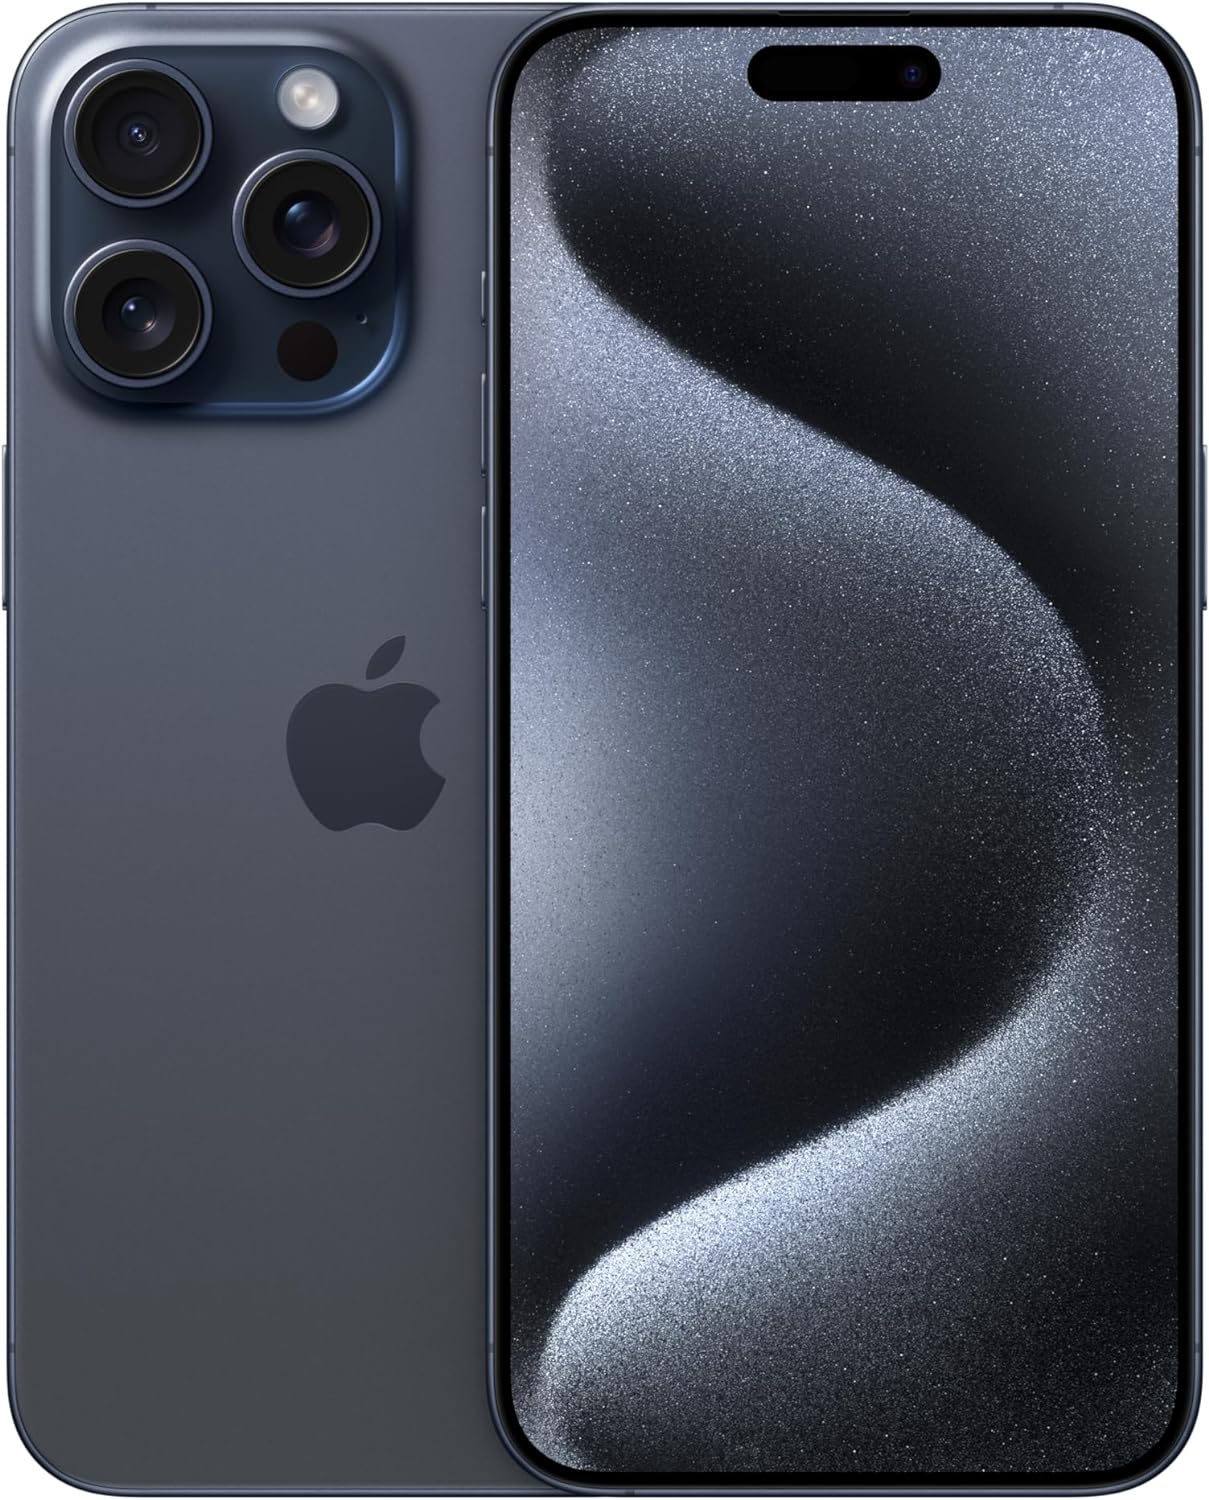 Apple iPhone 15 Pro Max (256 GB) - Blue Titanium | [Locked] | Boost Infinite plan required starting at $60/mo. | Unlimited Wireless | No trade-in needed to start | Get the latest iPhone every year